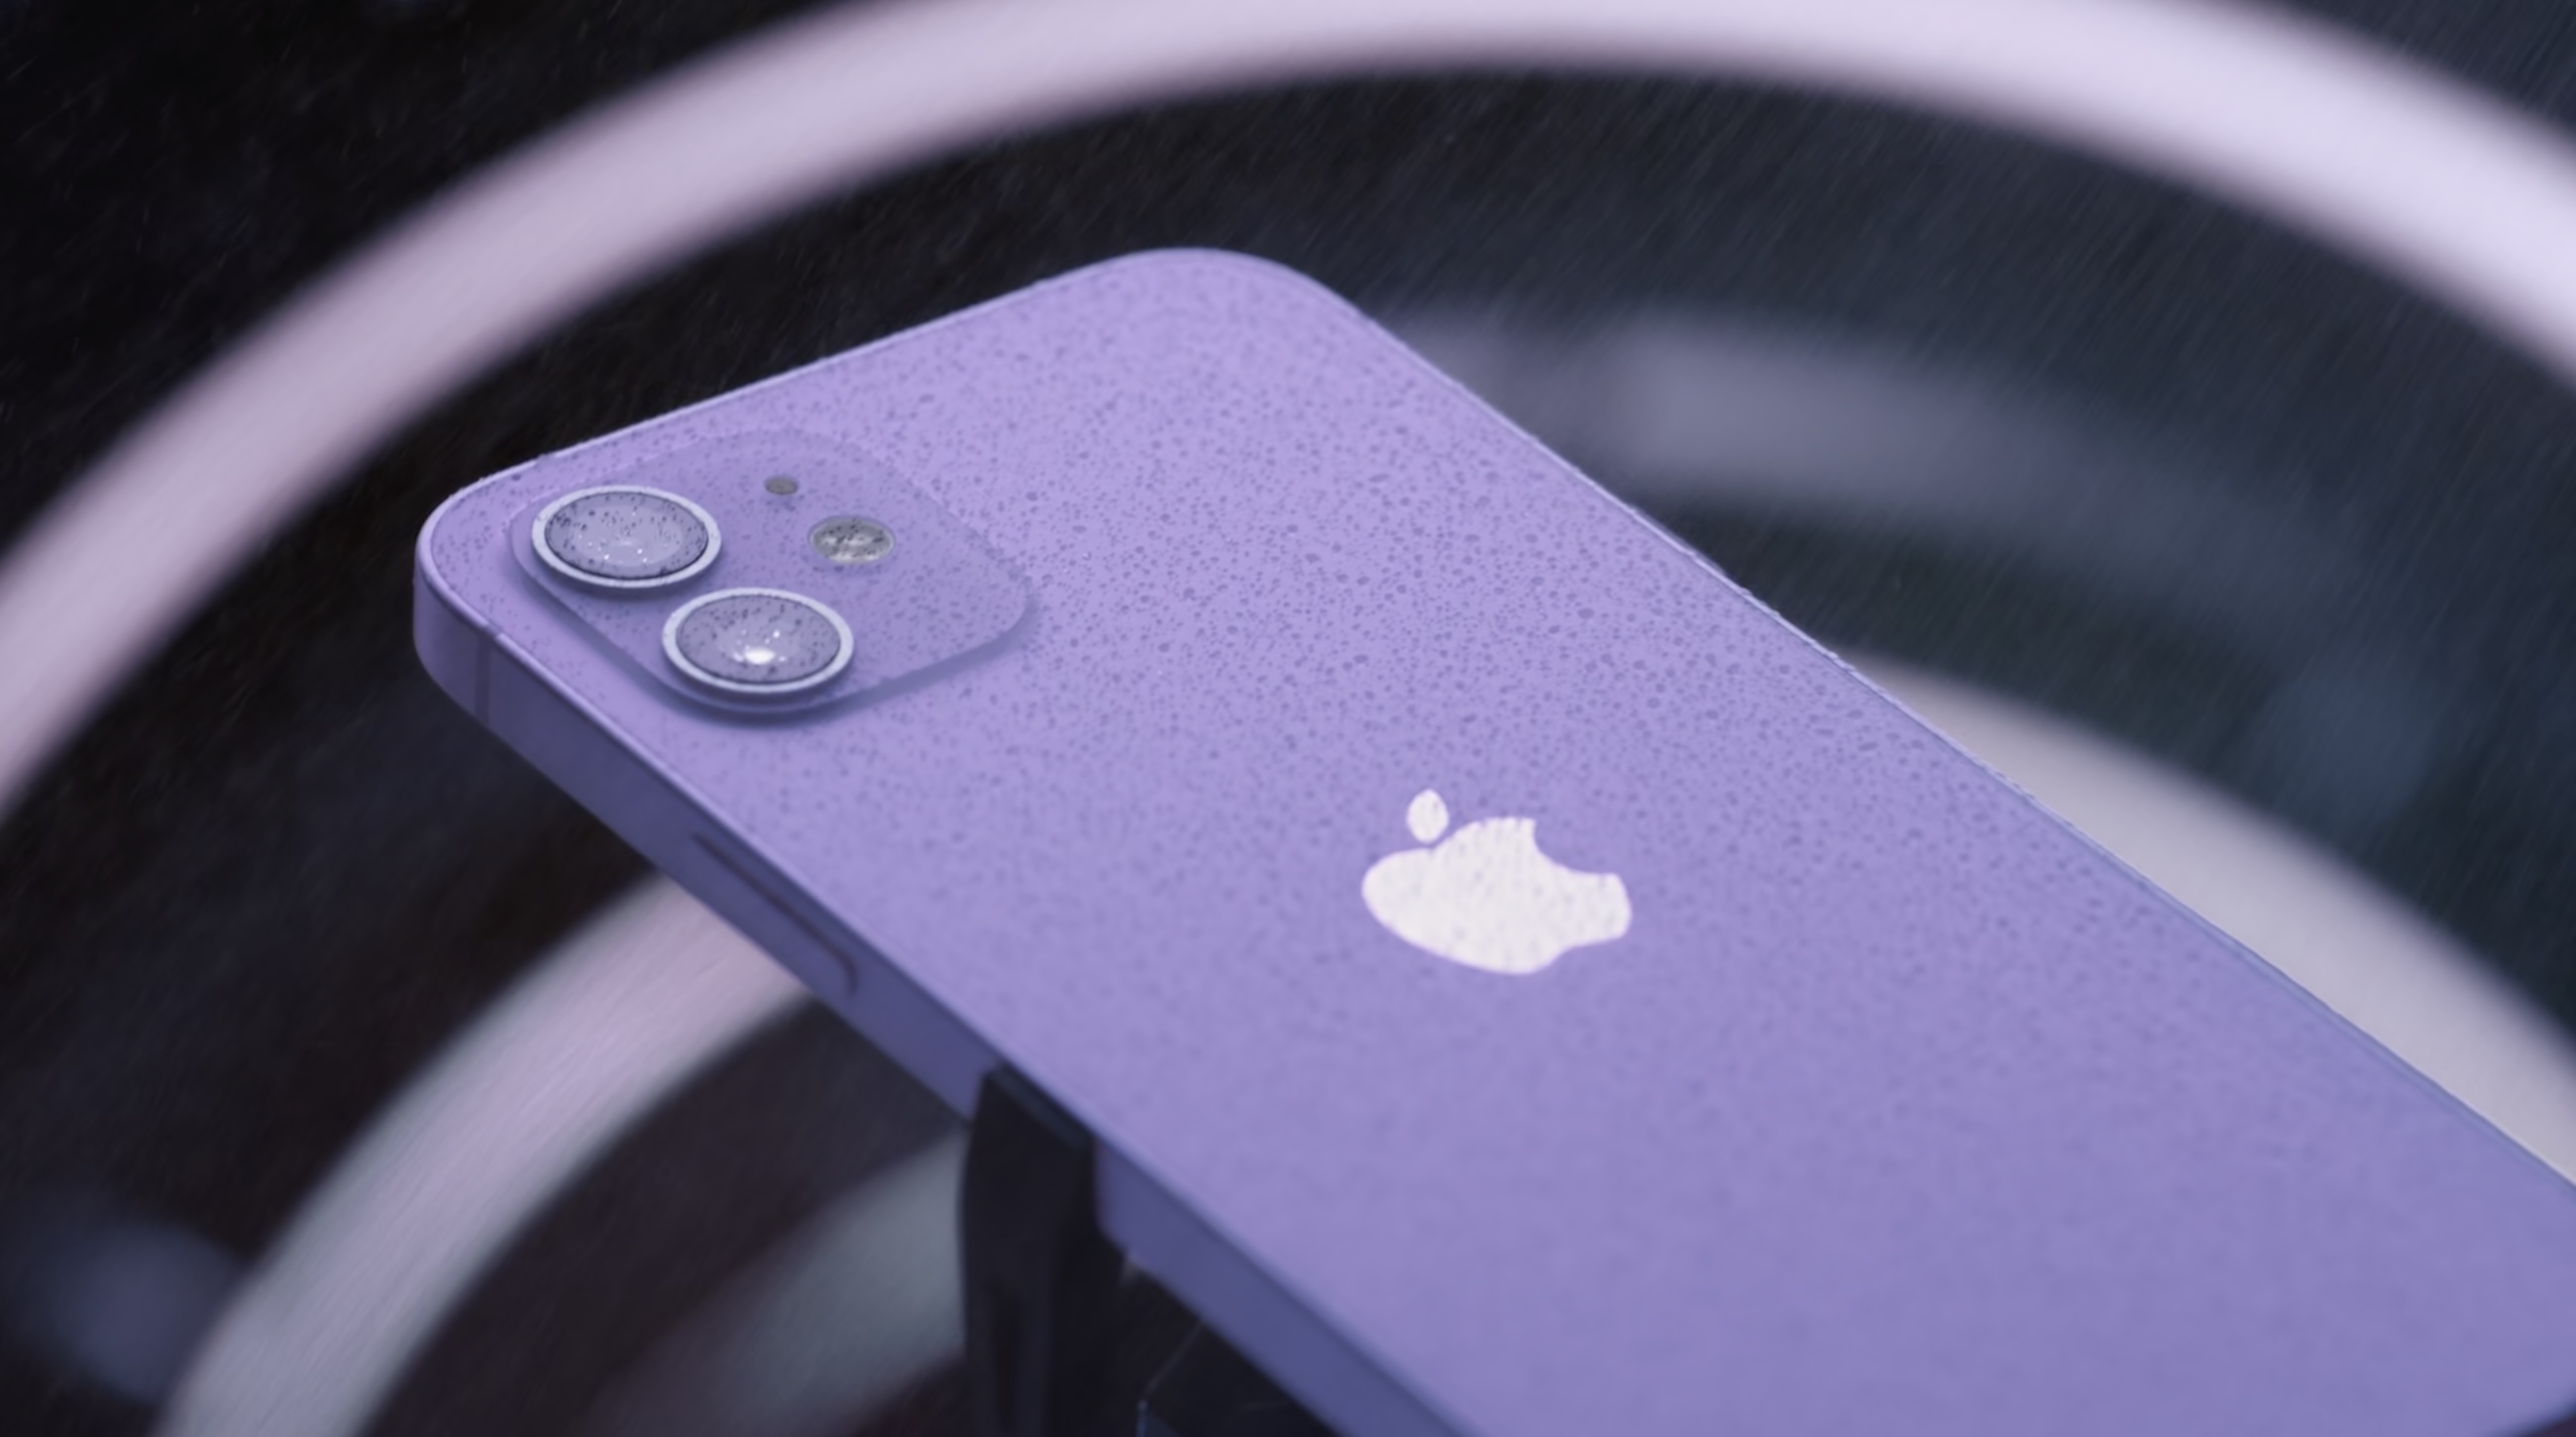 Apple announces new purple iPhone 12 color, available for preorder on